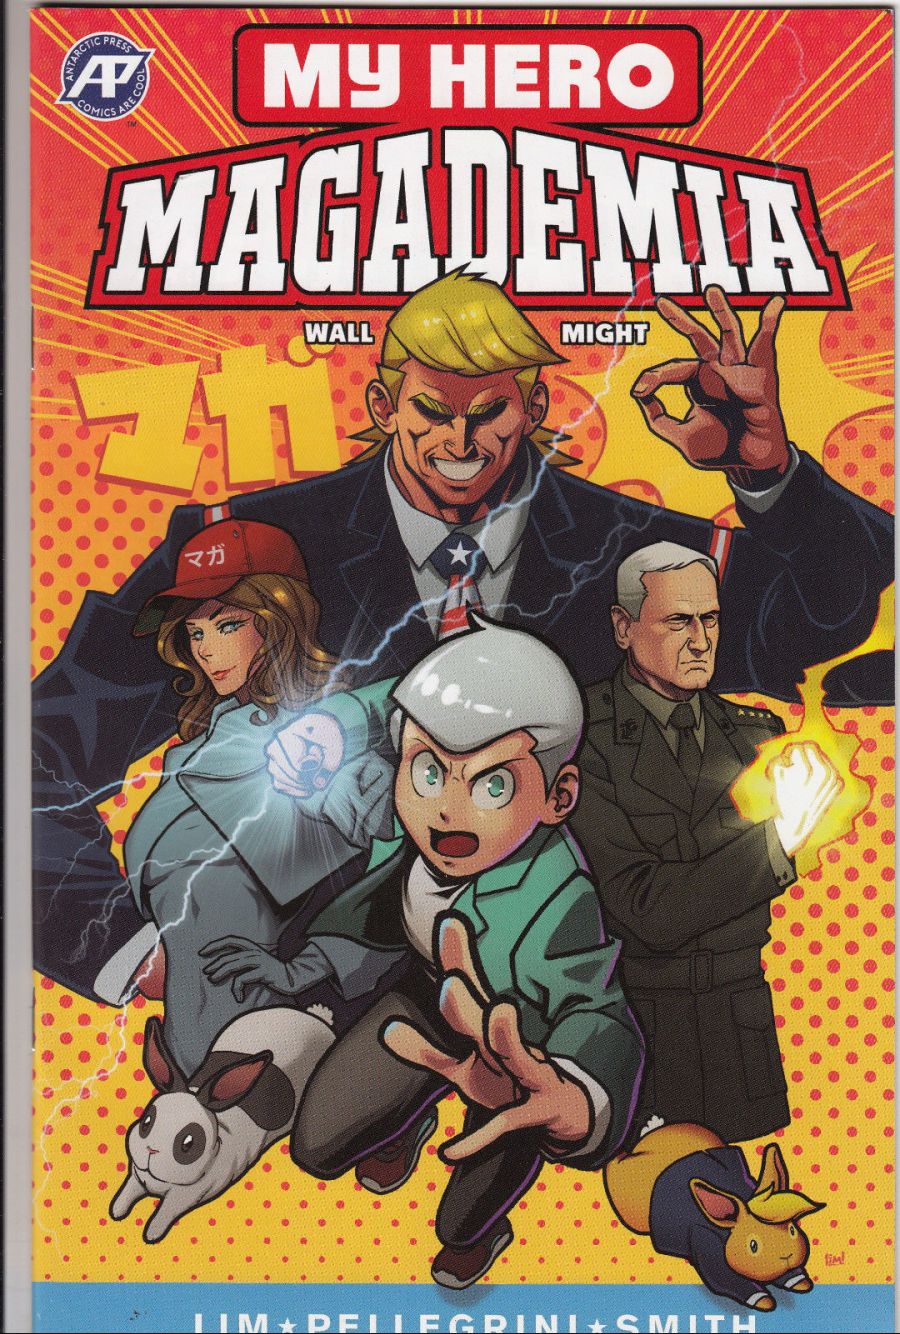 My-Hero-Magademia-1-Collectors-Edition-Variant-Limited.jpg